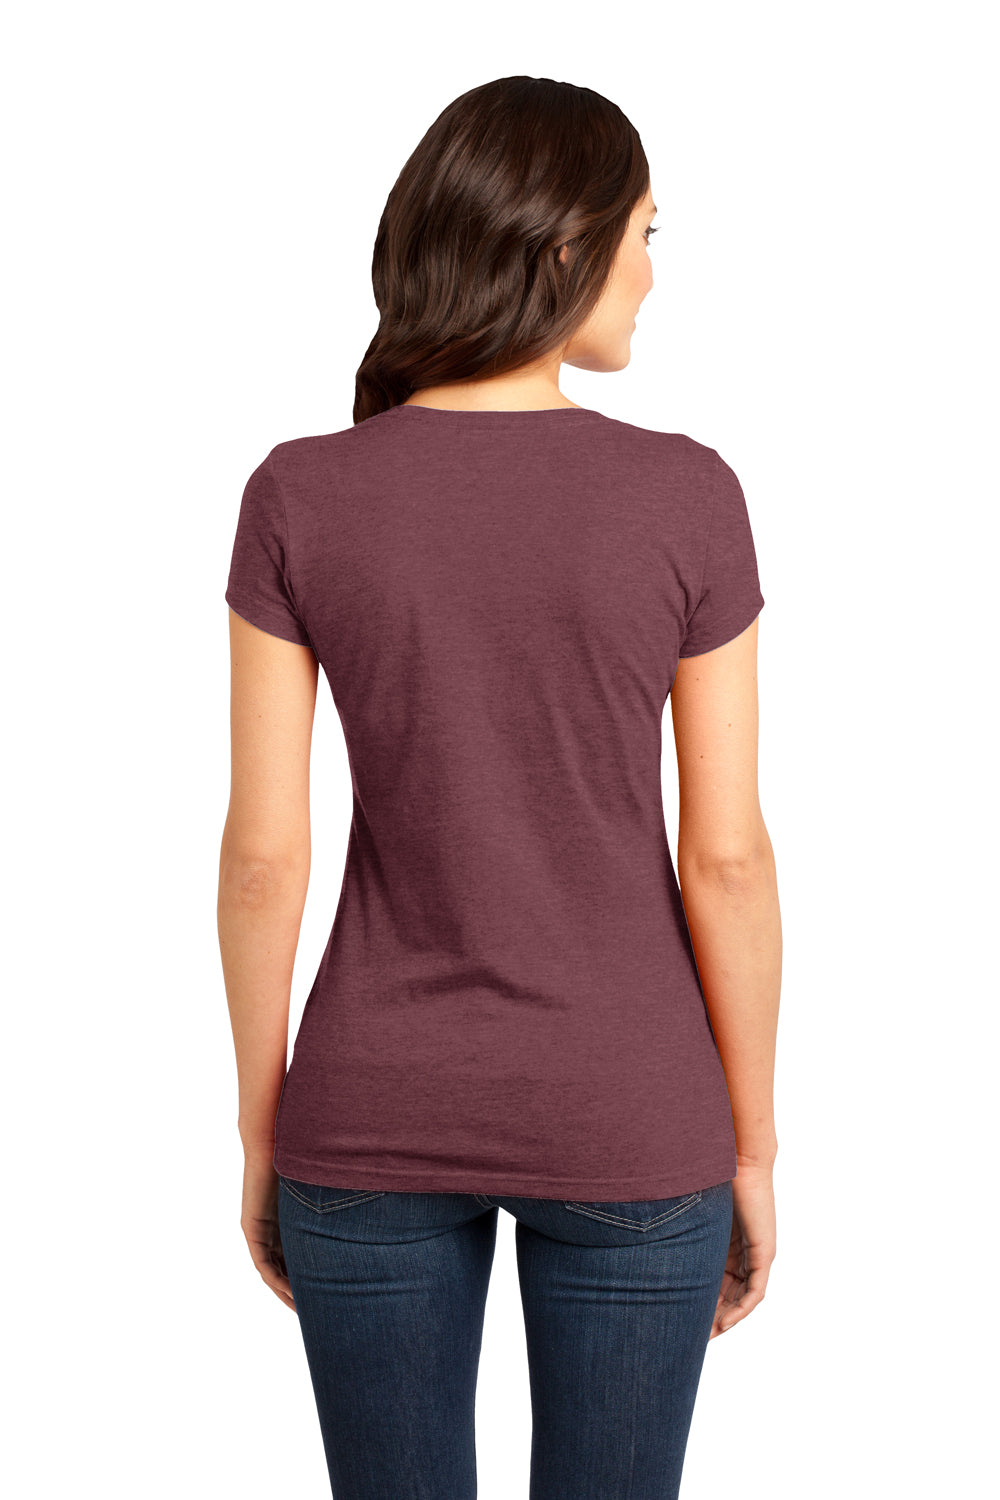 District DT6001 Womens Very Important Short Sleeve Crewneck T-Shirt Heather Cardinal Red Back